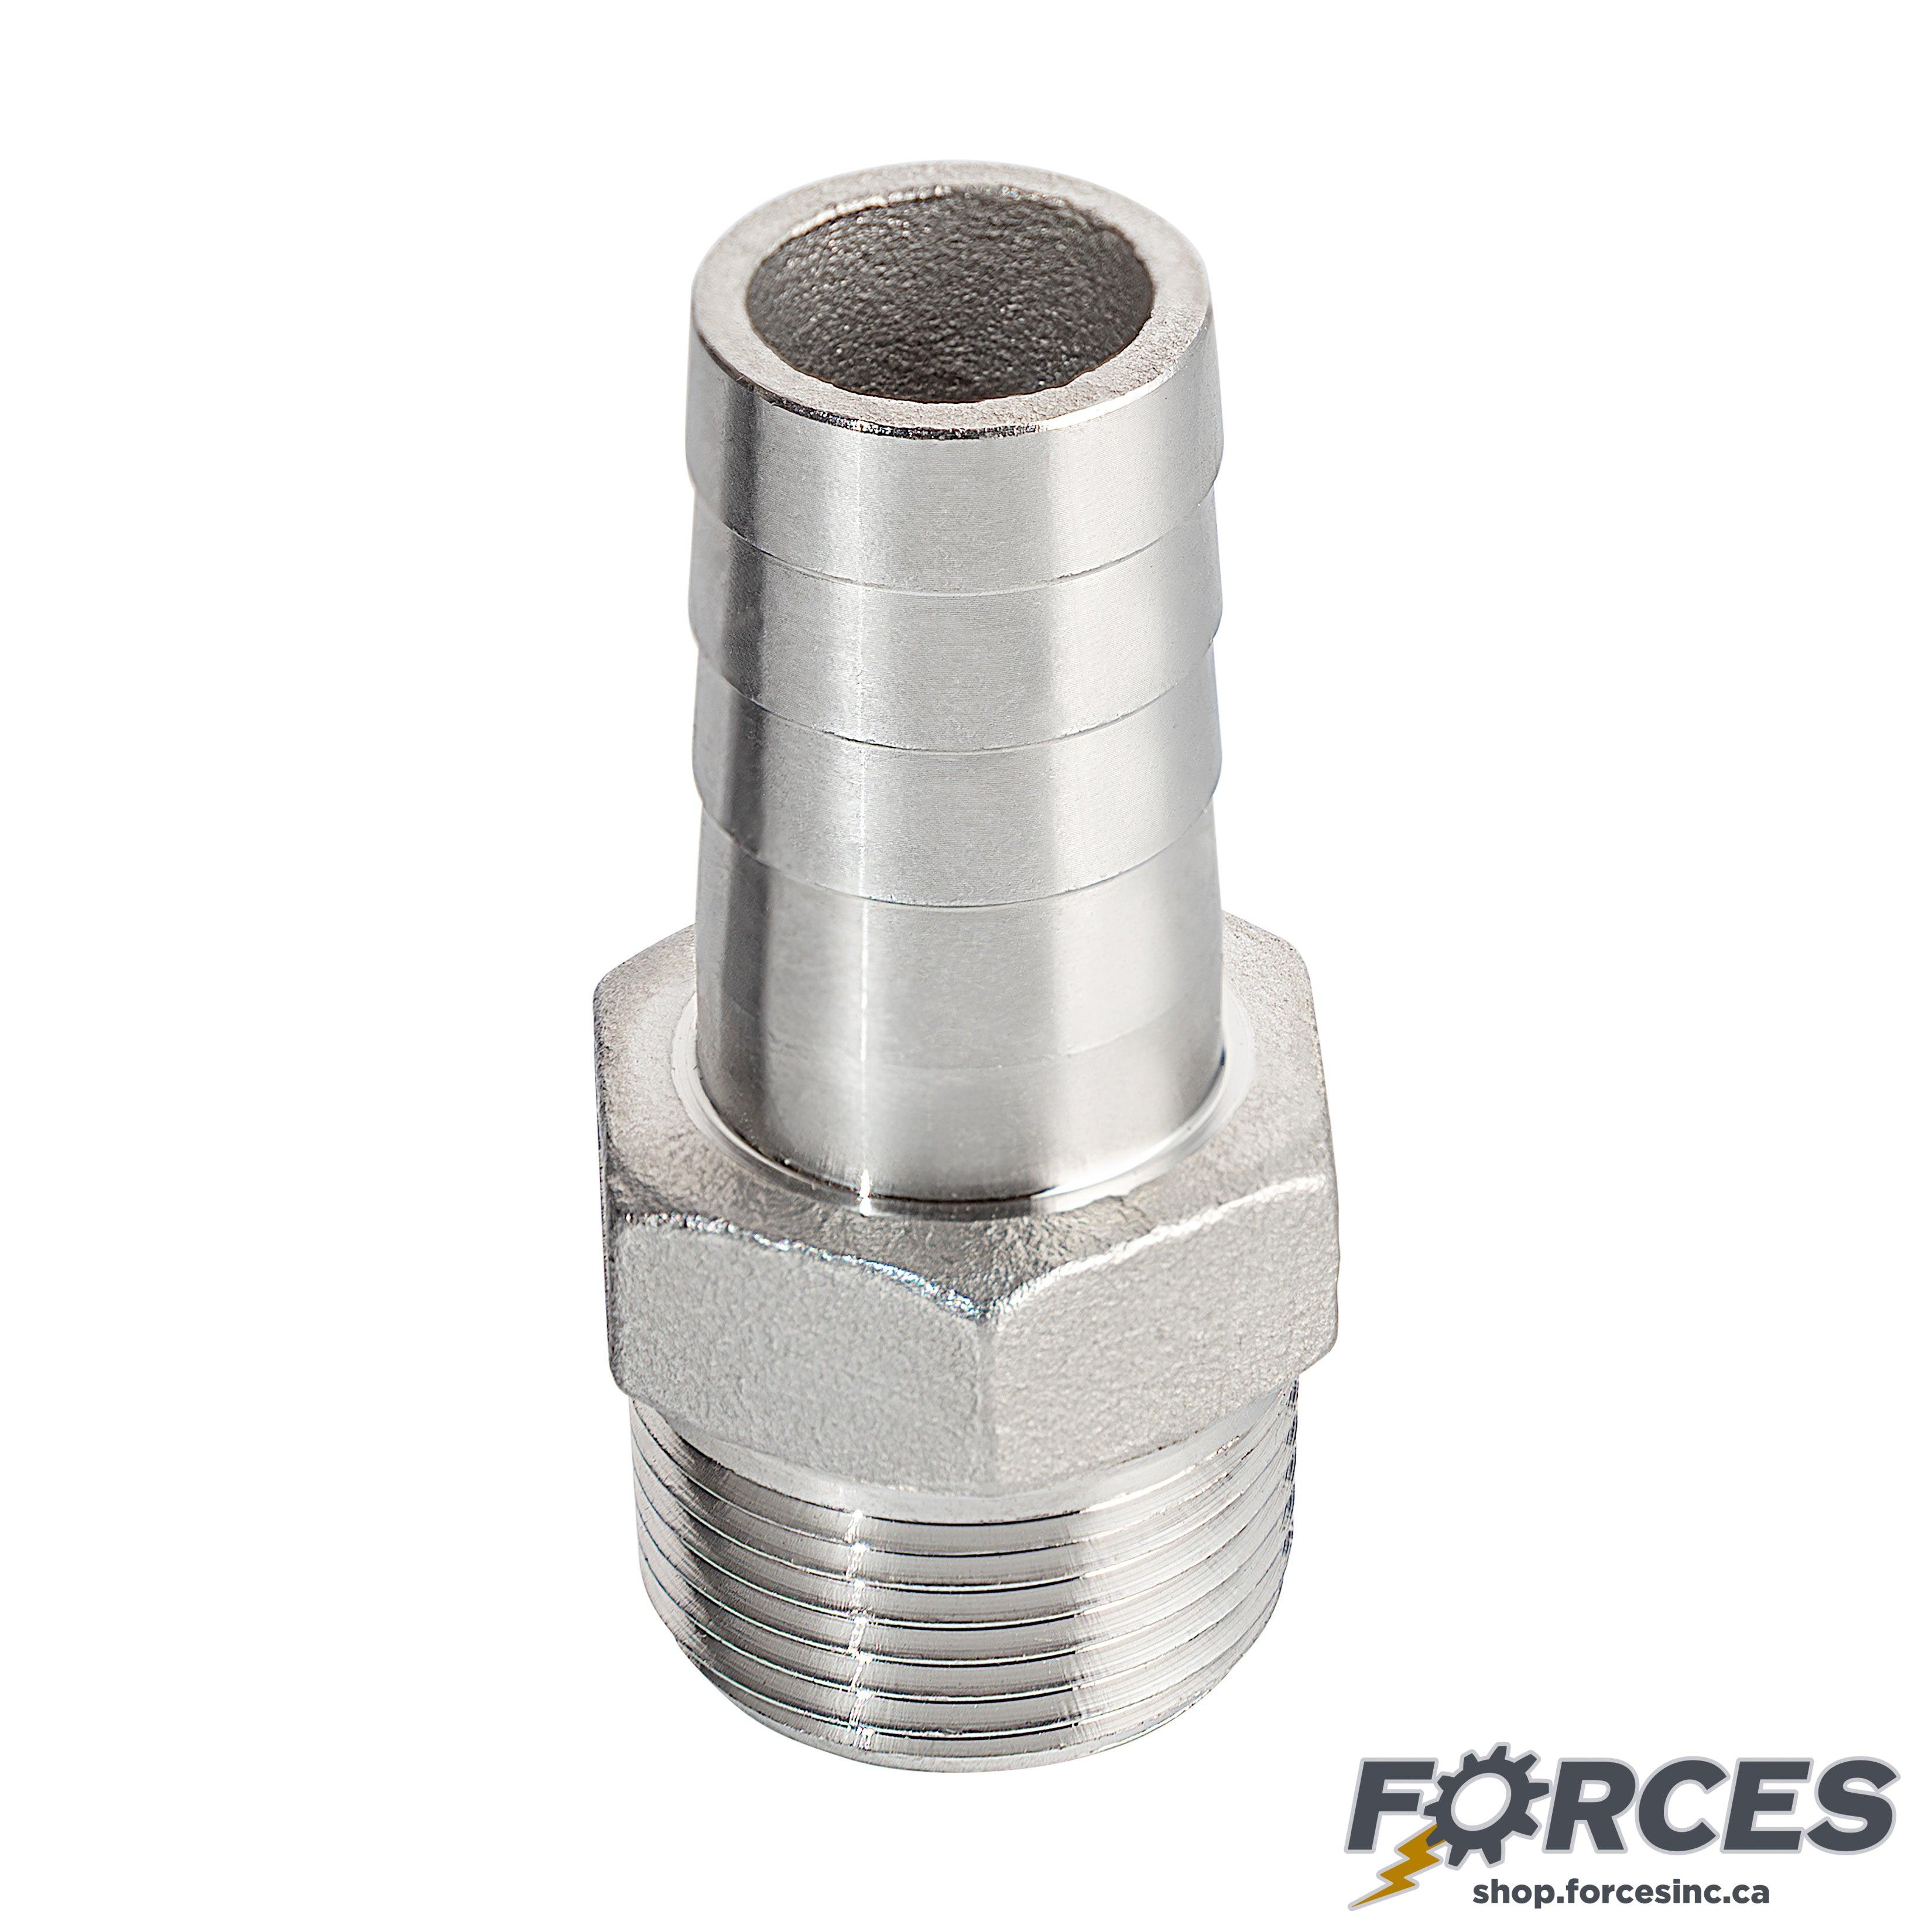 Hose Barb 2" x 2" NPT #150 - Stainless Steel 316 - Forces Inc